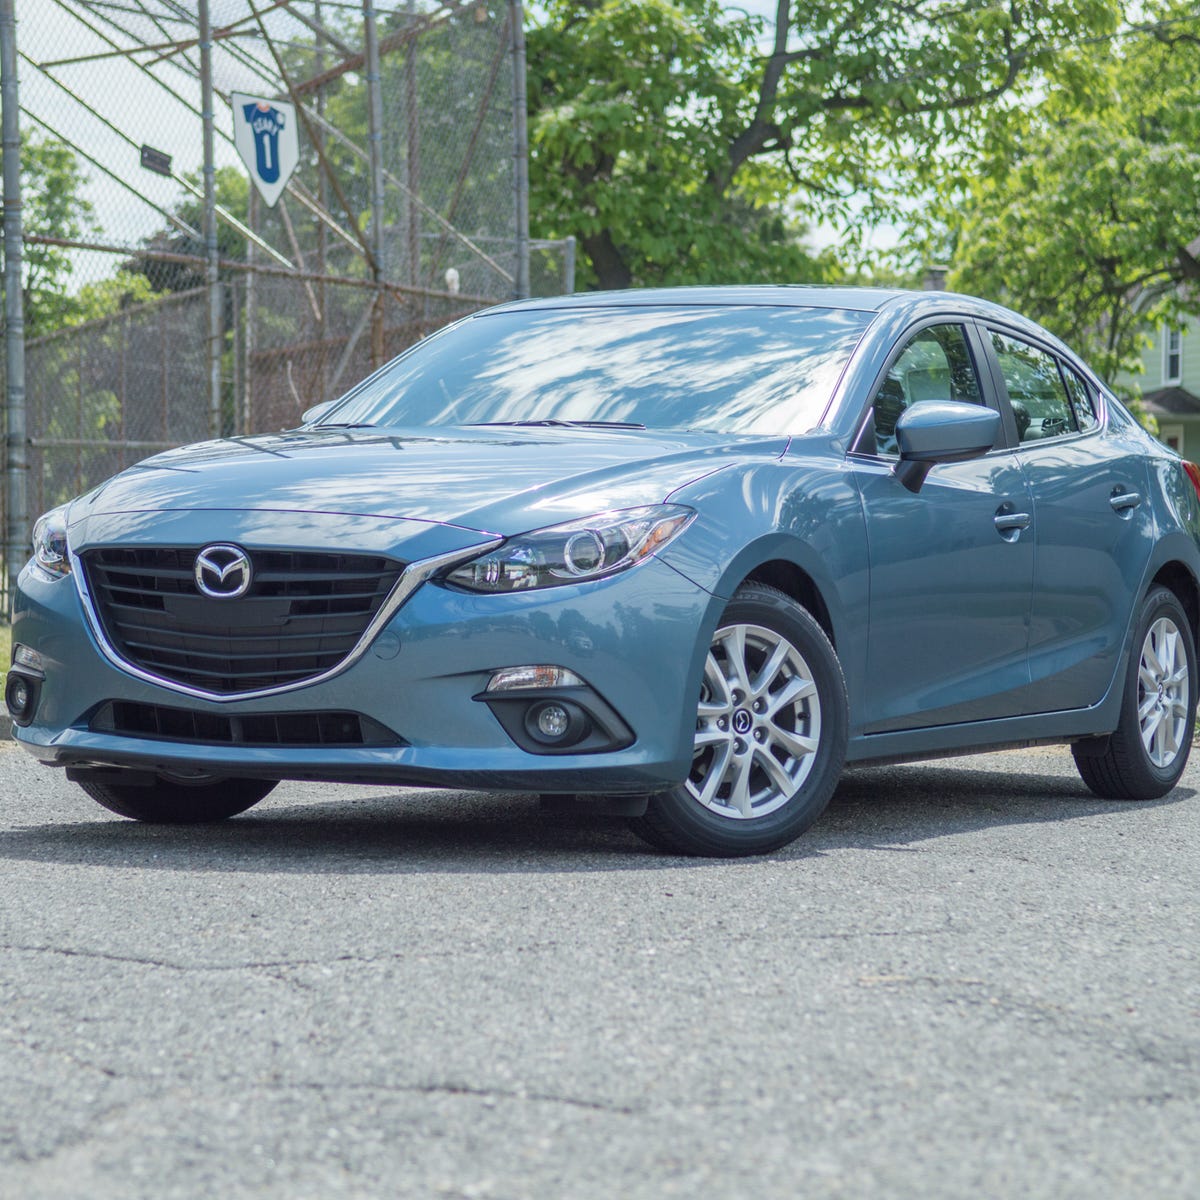 2016 Mazda Mazda3 i Grand Touring review: The closest we'll get to a  practical Miata - CNET